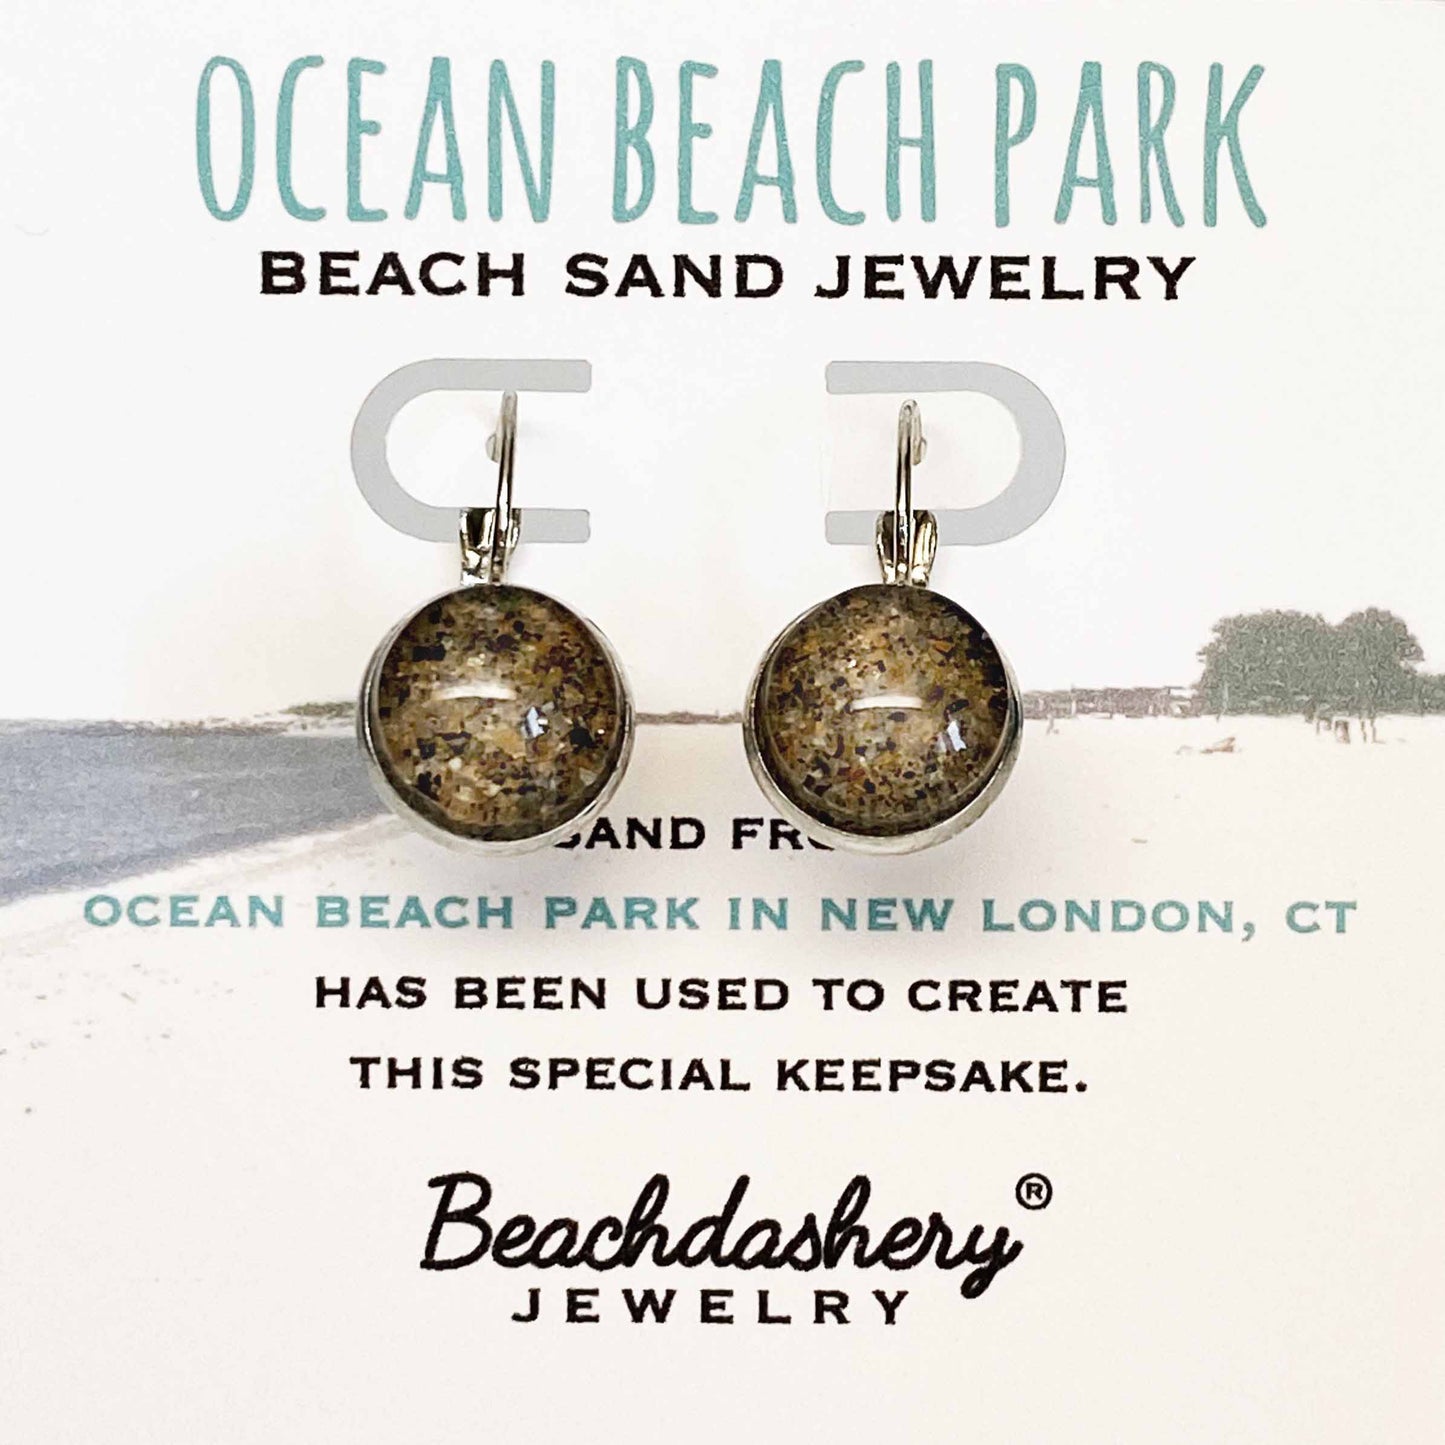 Load image into Gallery viewer, Ocean Beach Park Connecticut Sand Jewelry Beachdashery® Jewelry
